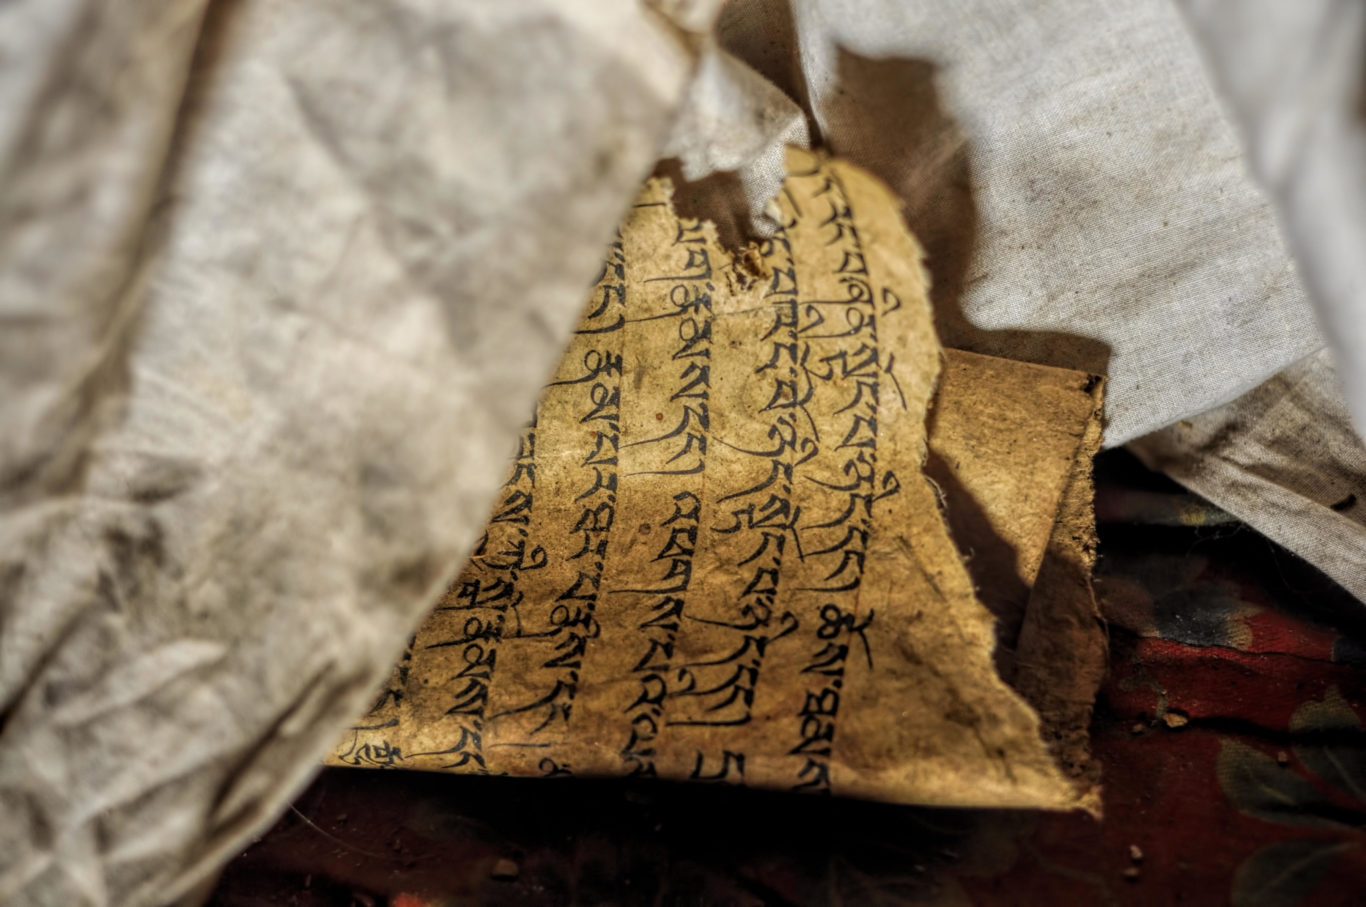 close-up view of ancient buddhist texts